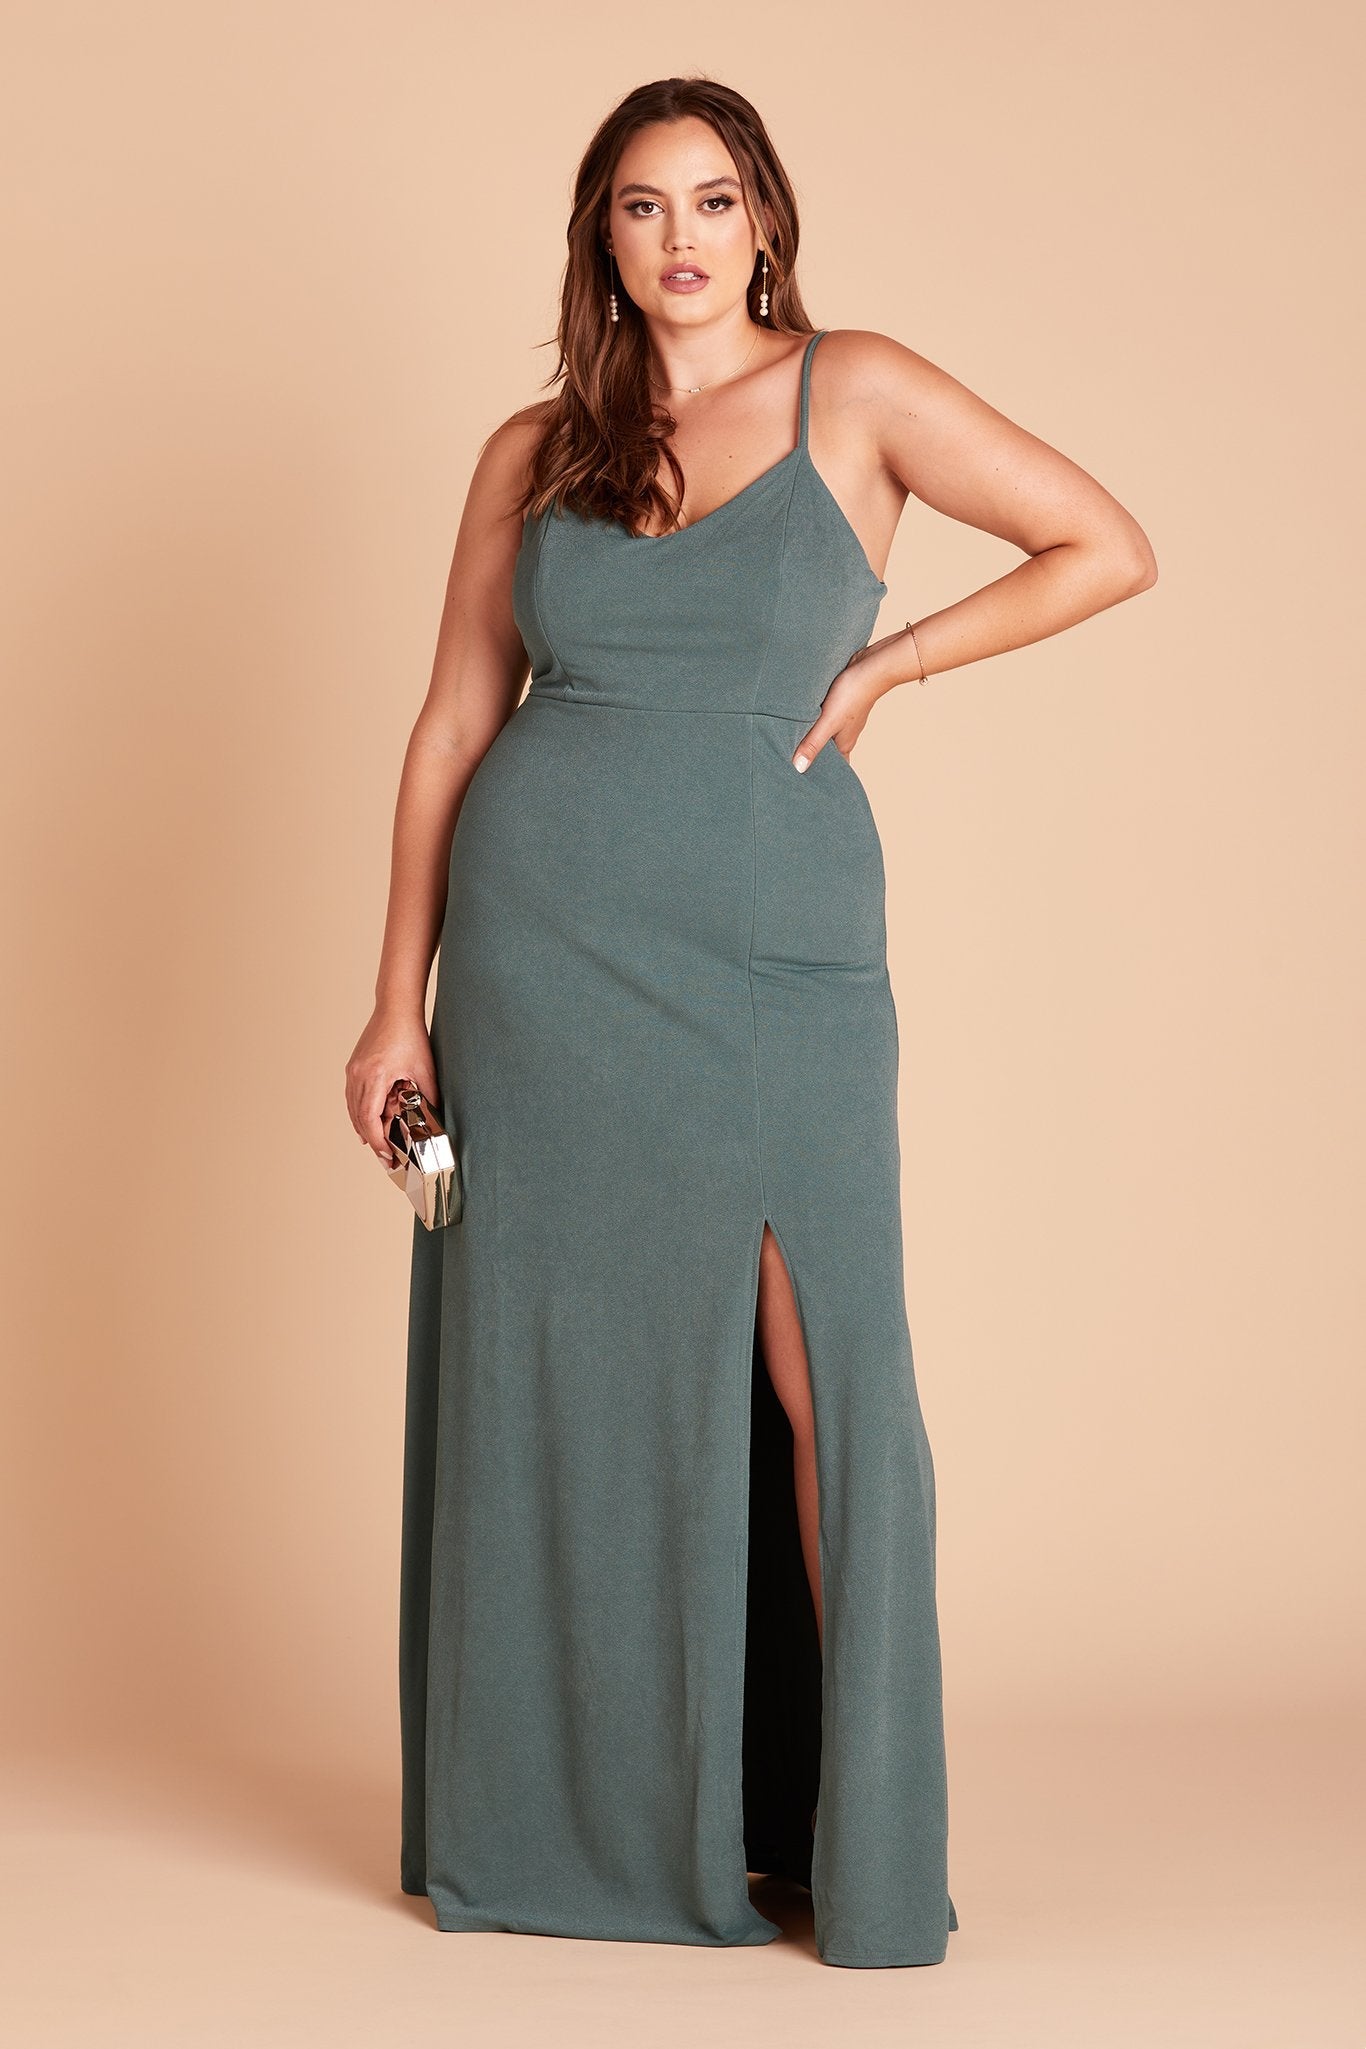 Jay plus size bridesmaid dress with slit in sea glass green crepe by Birdy Grey, front view